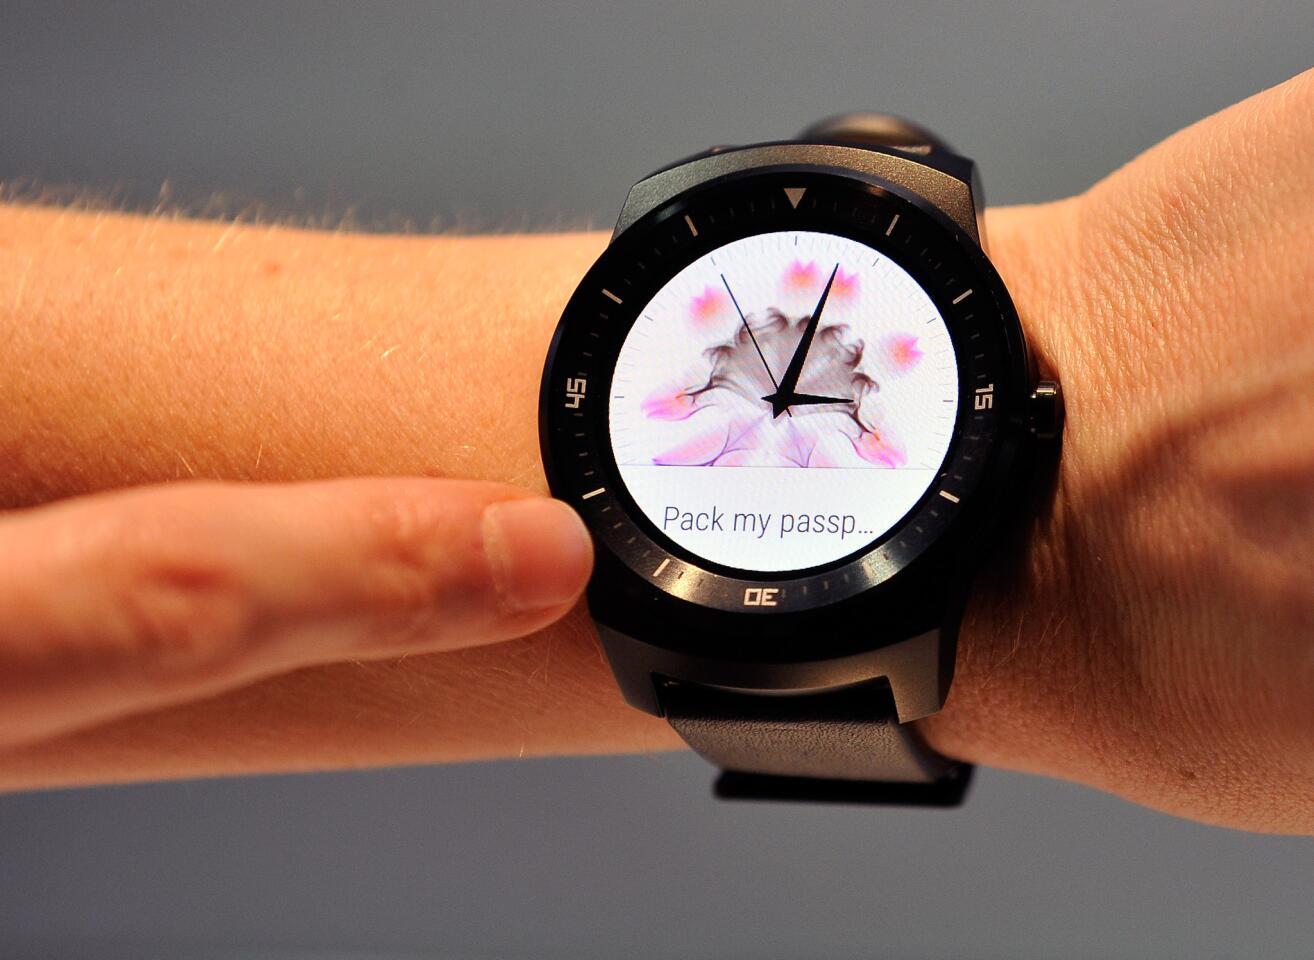 The LG G Watch R is shown during the 2015 International CES in January. Users say they enjoy the non-techie look of the watch because the device blends in as if it were a normal timepiece.